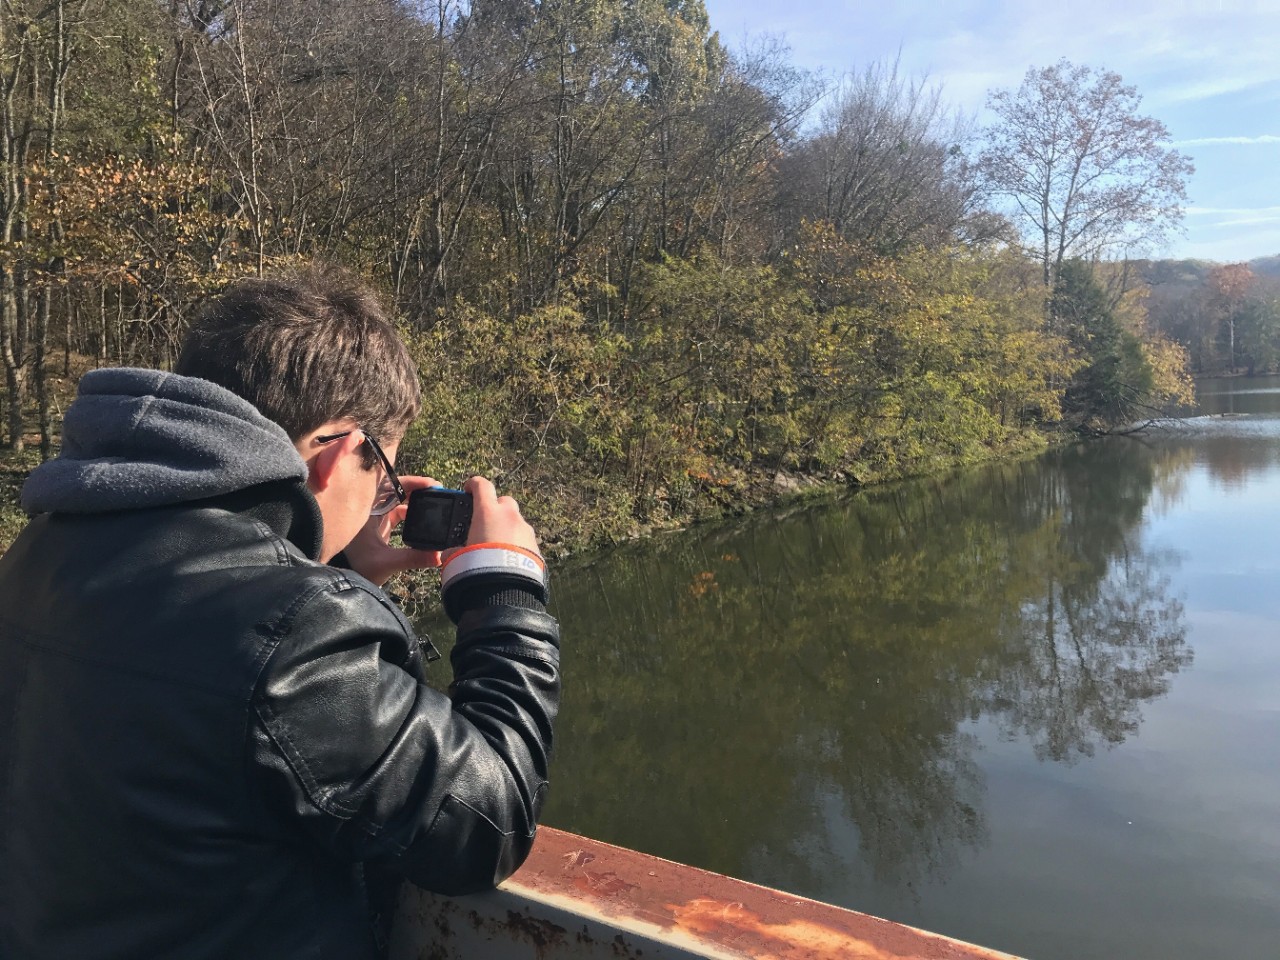 a young man stands on a bridge over a lake, with trees on the bank - he is taking a photo and wearing sunglasses and a windbreaker on a sunny day